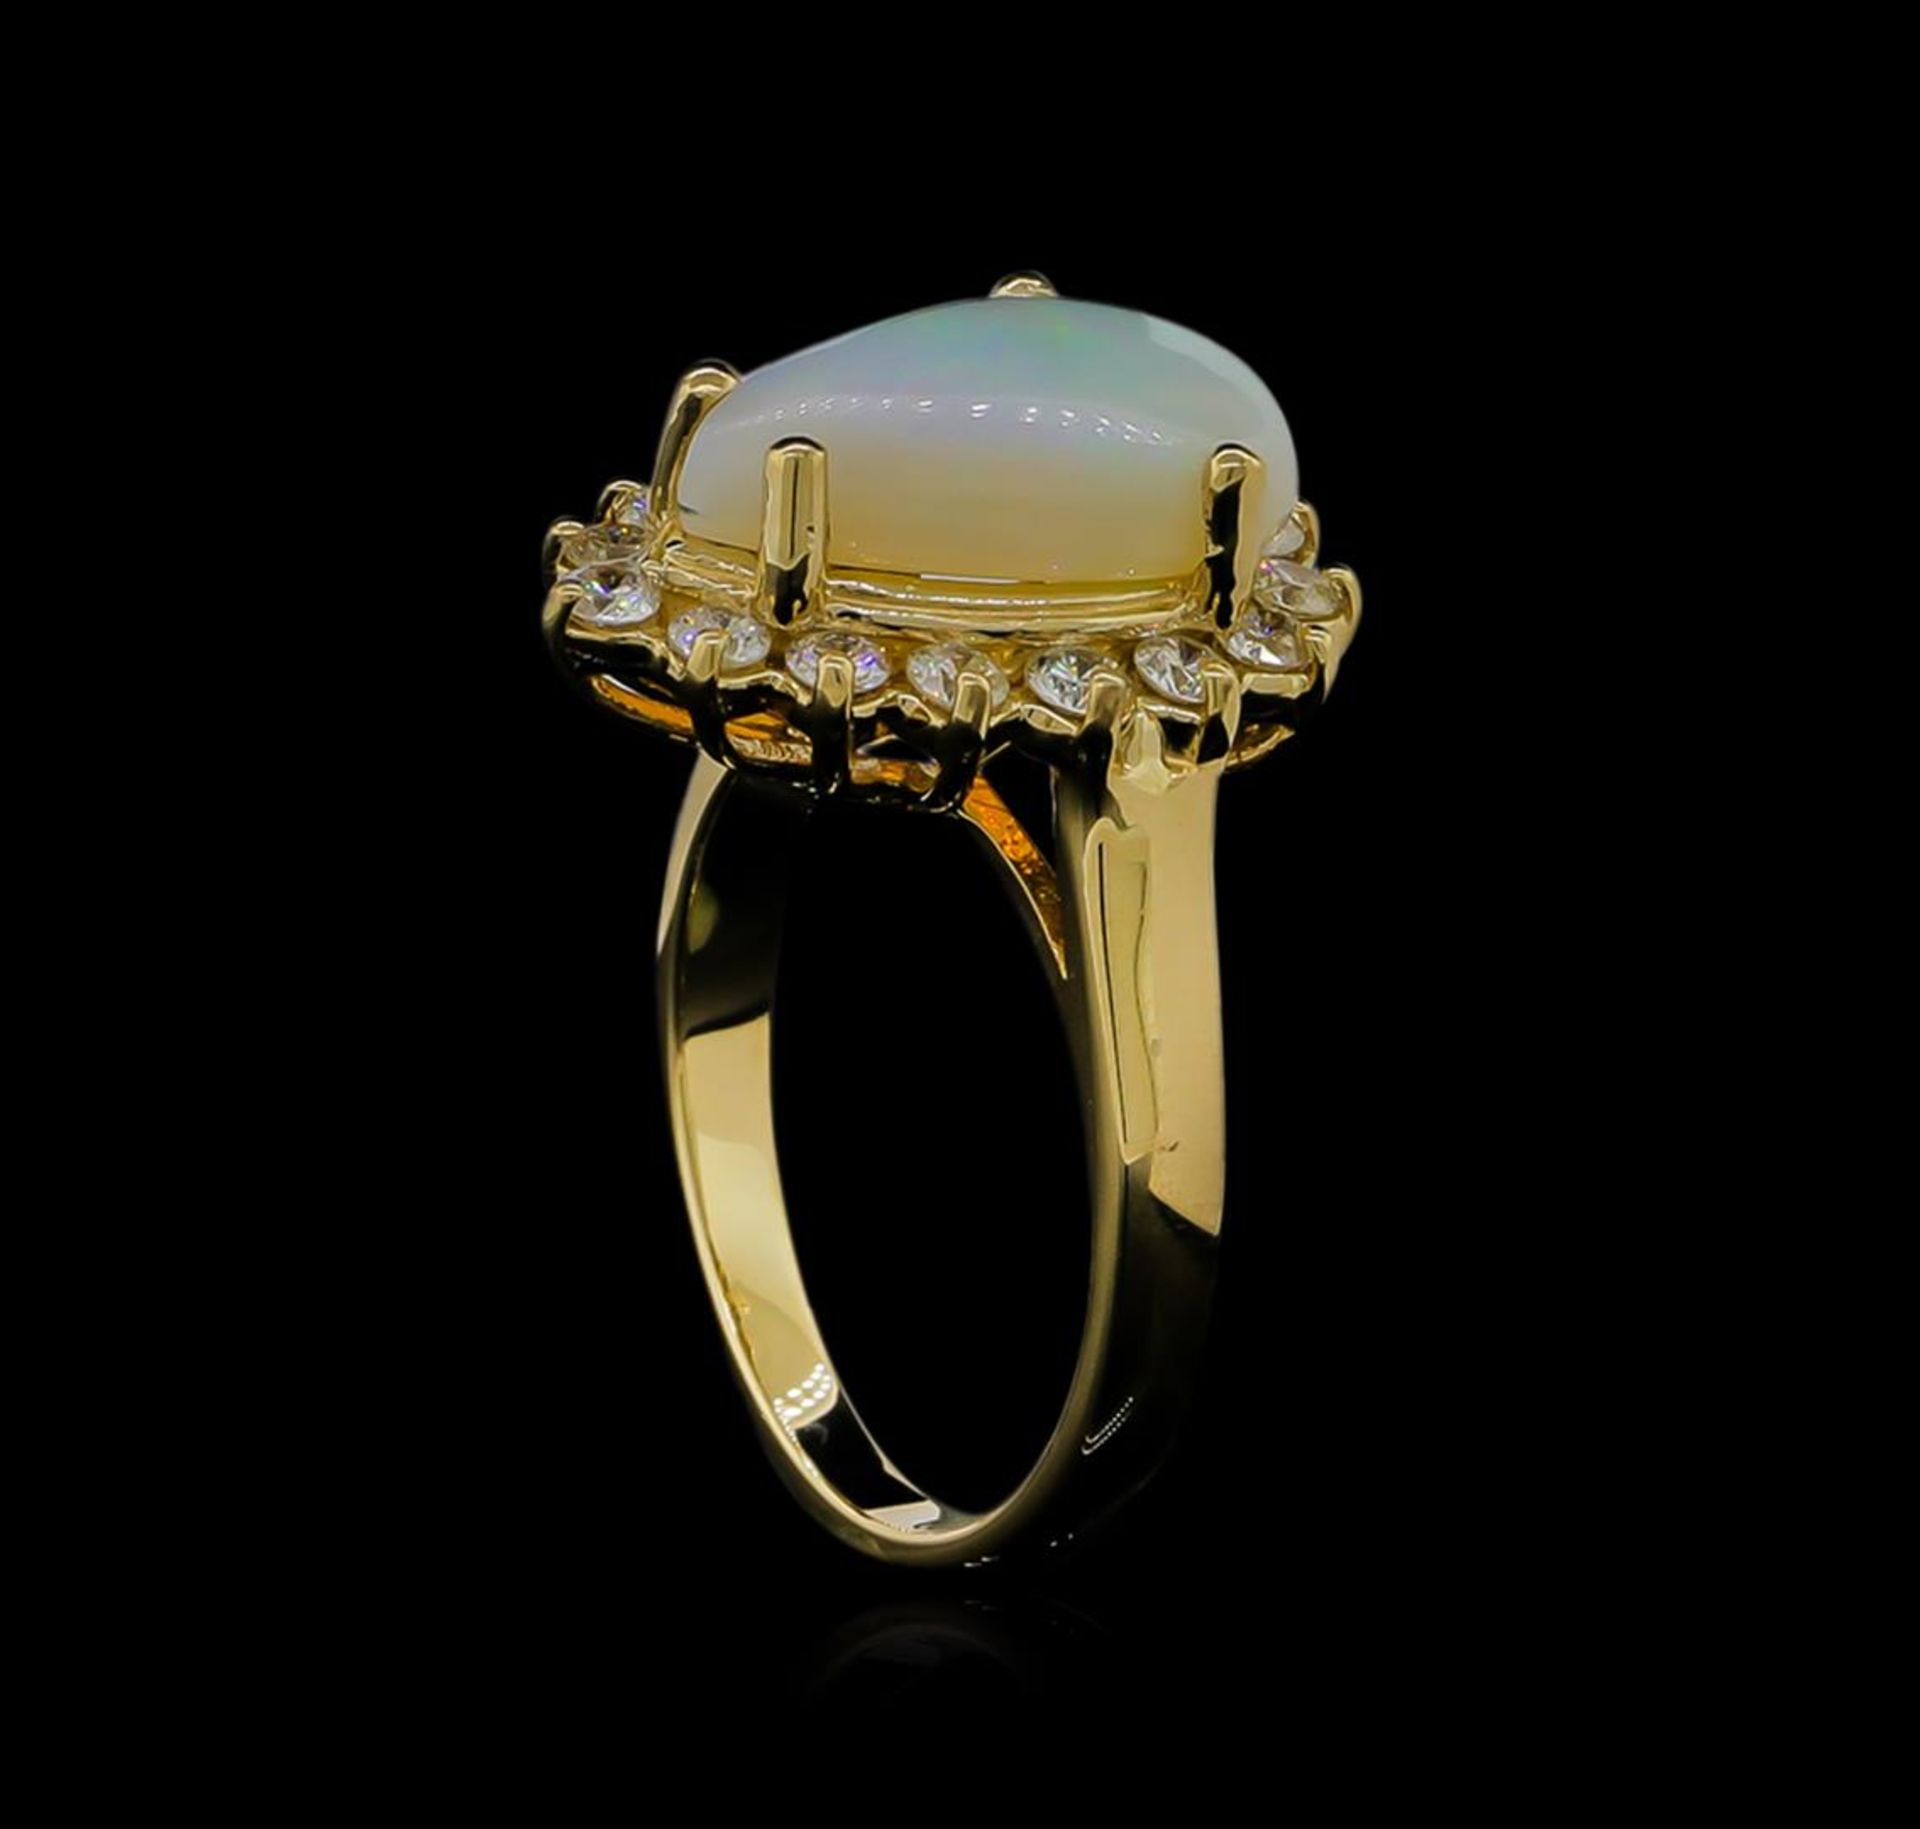 1.00 ctw Opal and Diamond Ring - 14KT Yellow Gold - Image 4 of 4